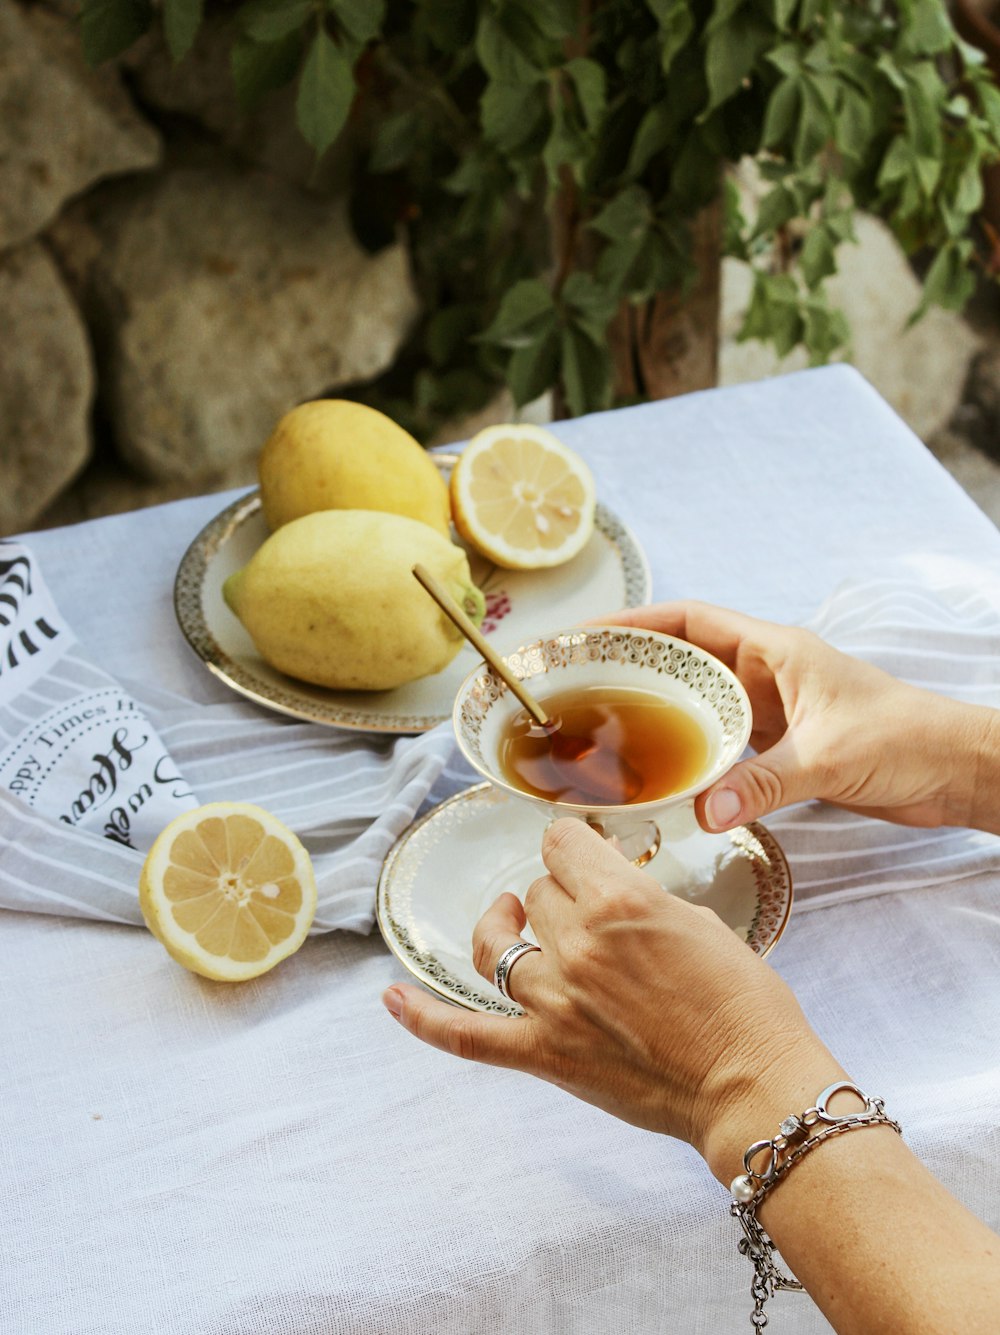 person holding white ceramic teacup with saucer with sliced lemon